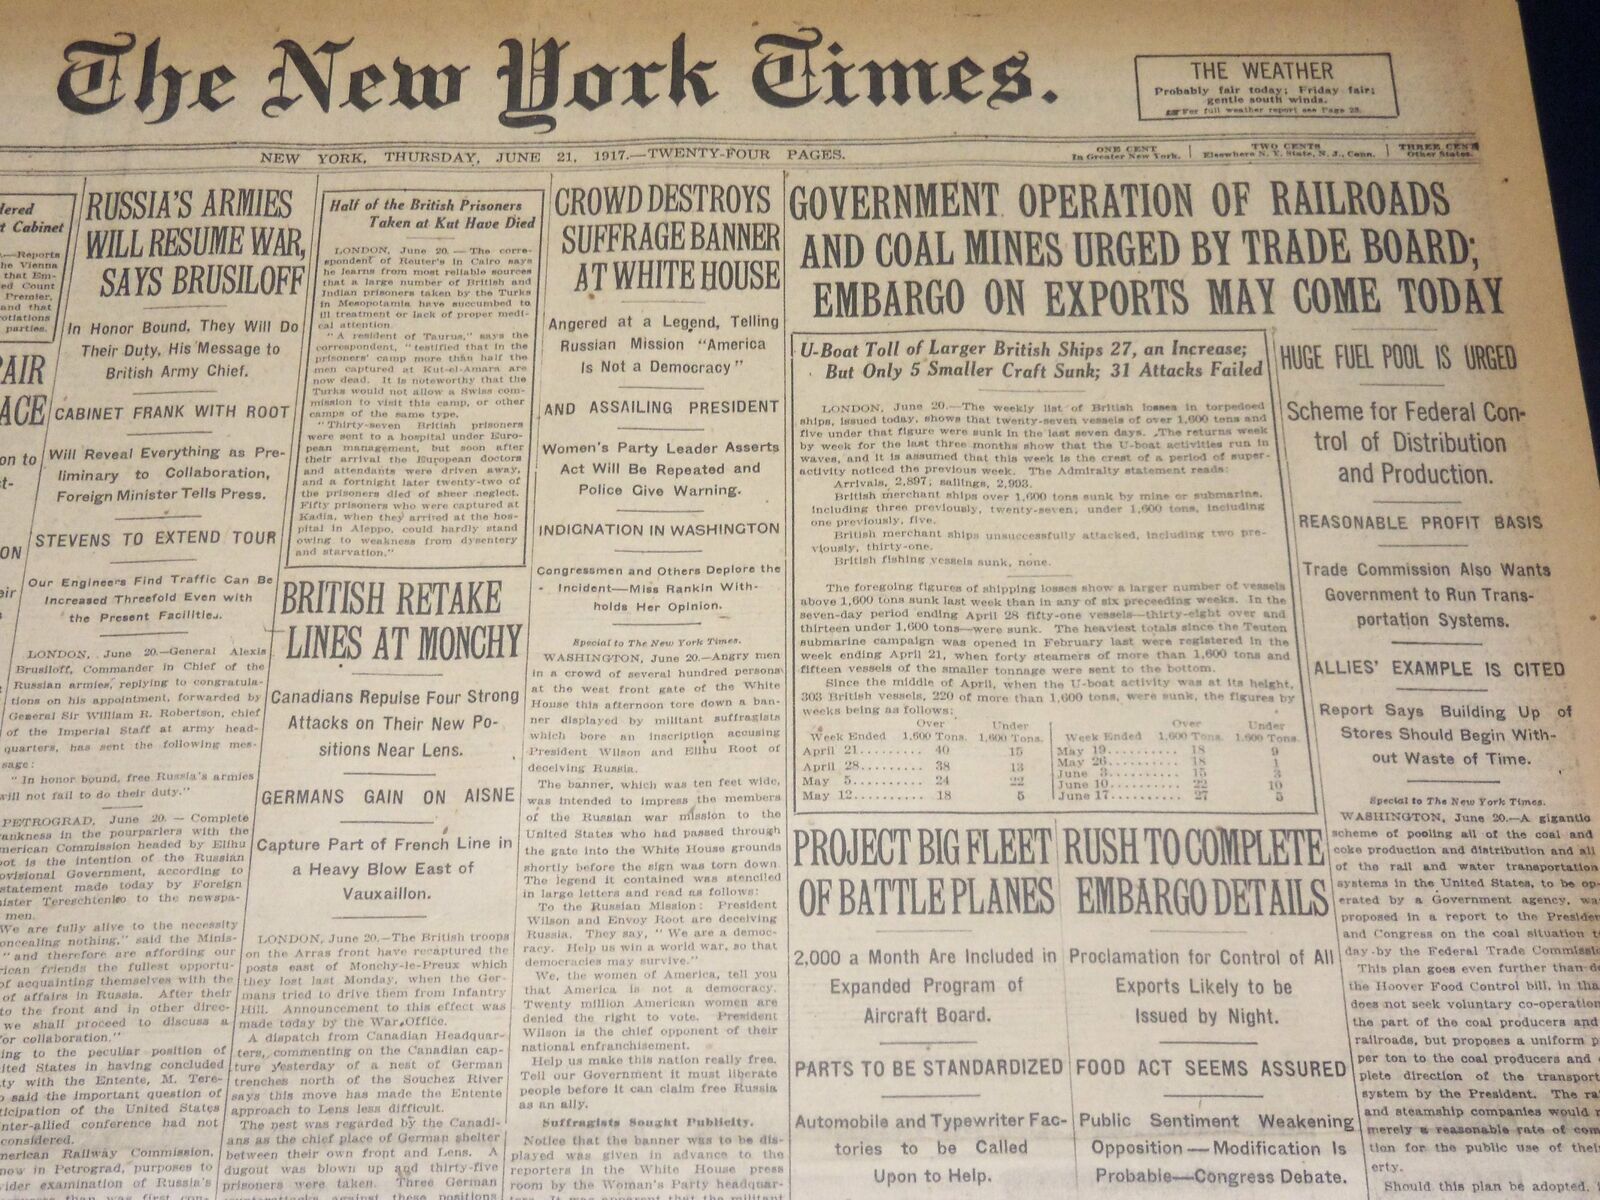 1917 JUNE 21 NEW YORK TIMES - SUFFRAGE BANNER DESTROYED AT WHITE HOUSE - NT 7808